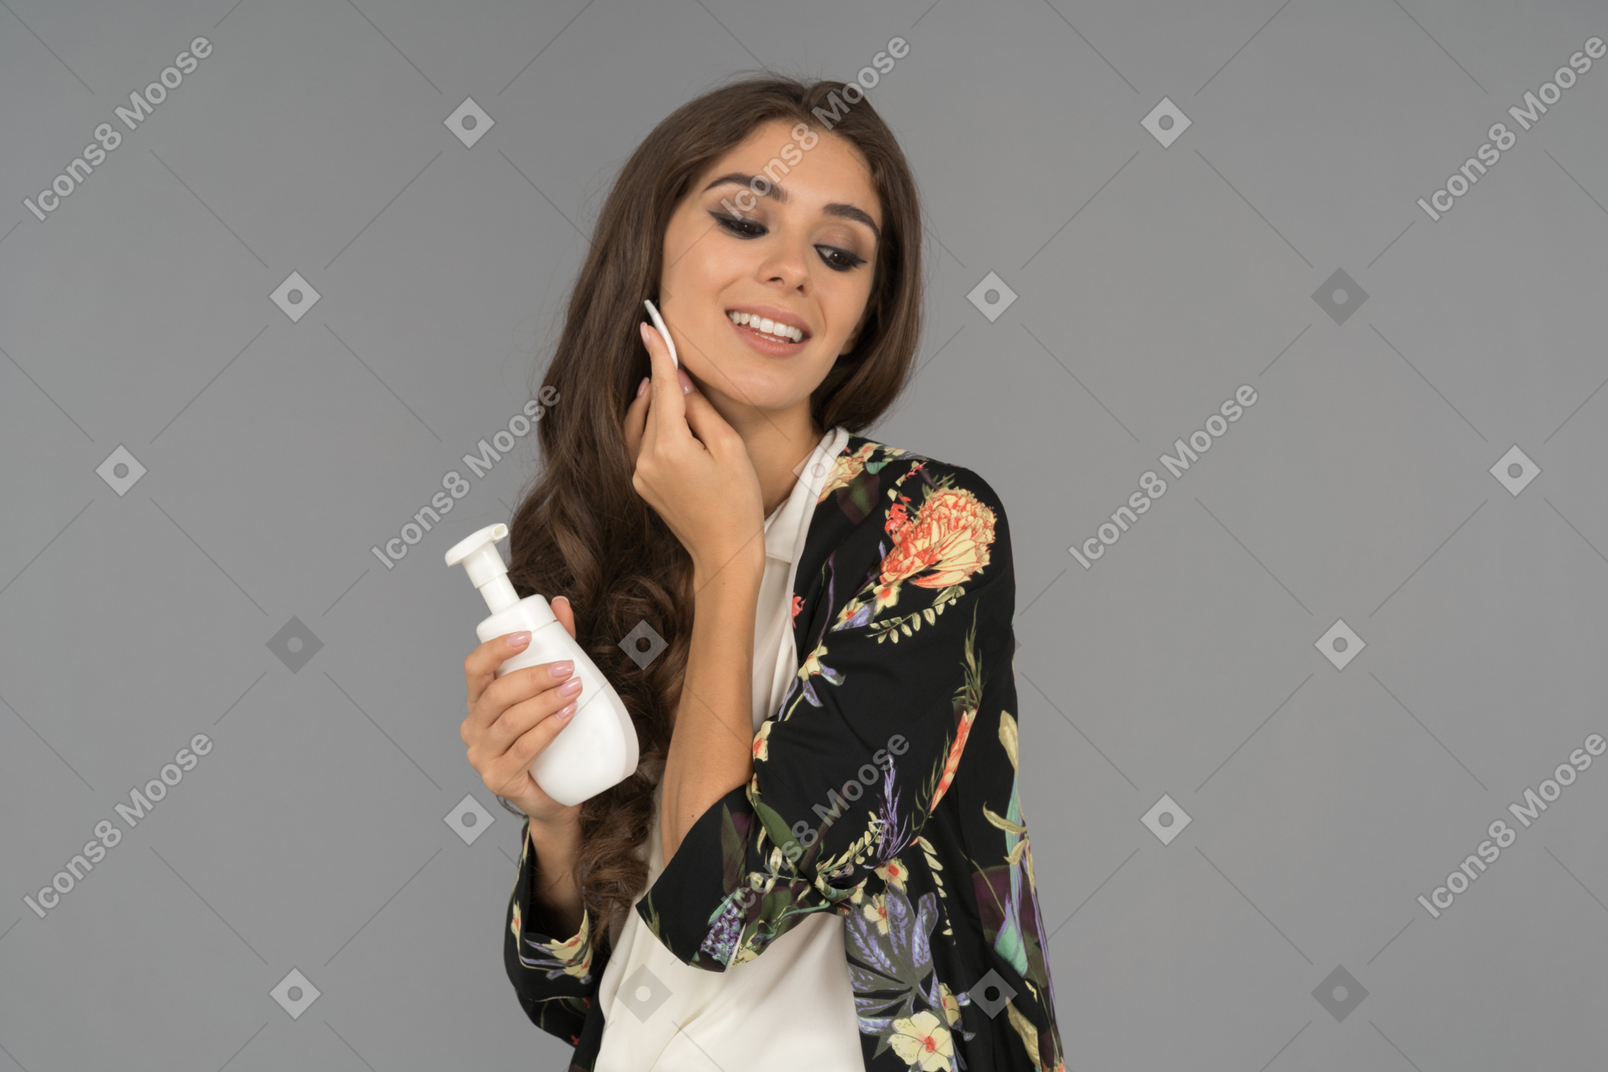 Smiling brunette woman is satisfied with a new skin care product